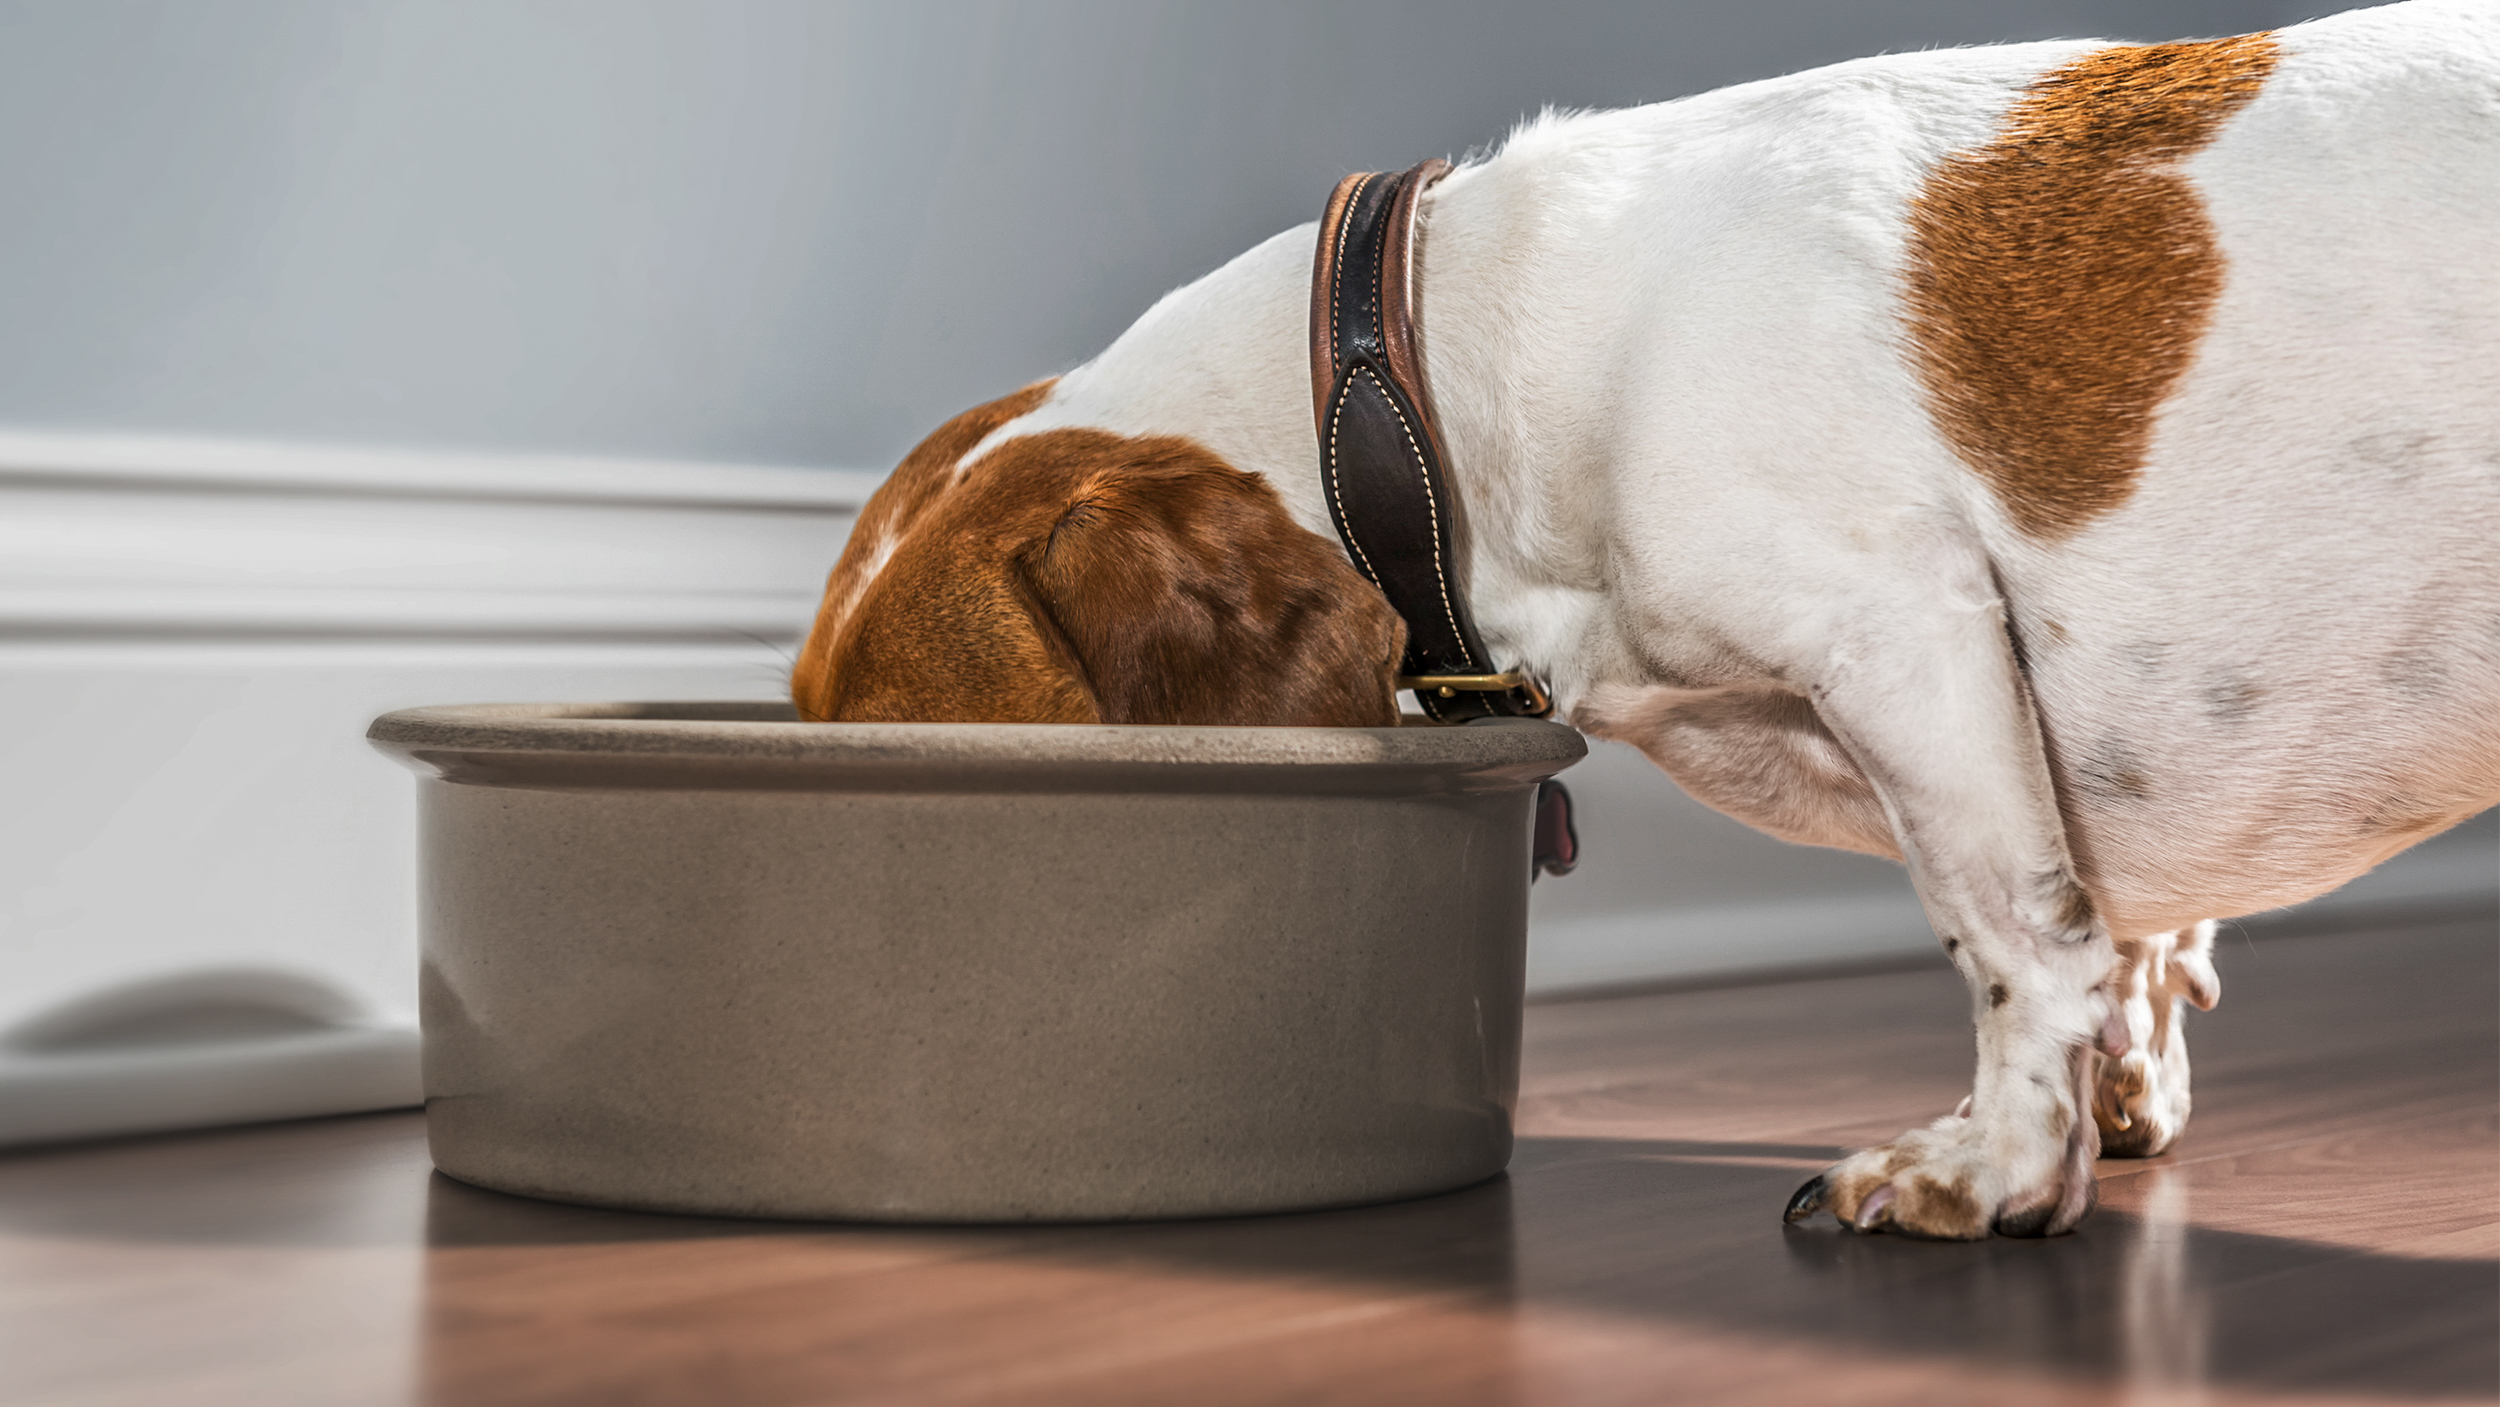 Adult Jack Russell standing indoors eating from a large bowl.